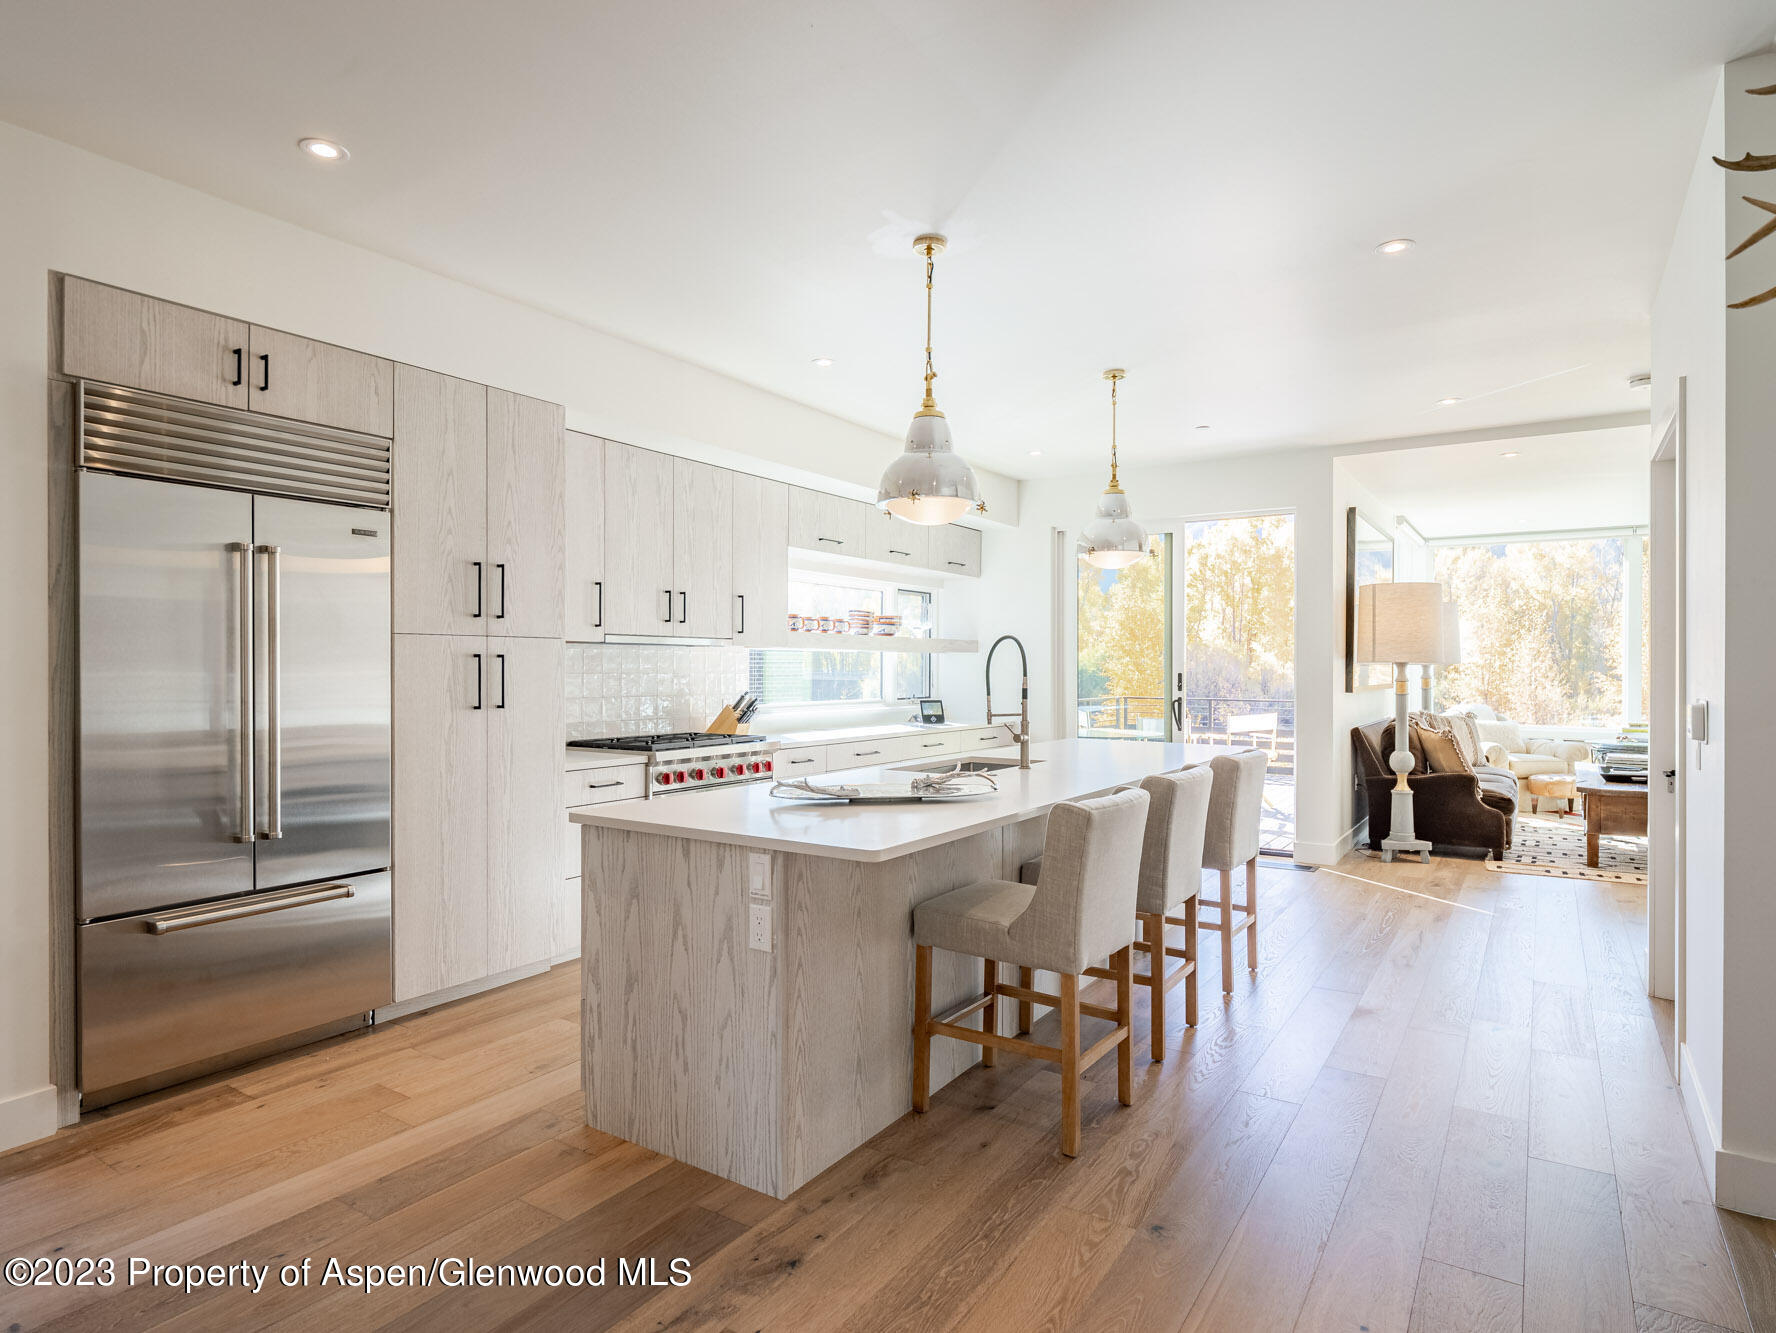 a kitchen with stainless steel appliances a stove a sink a center island and a wooden floor